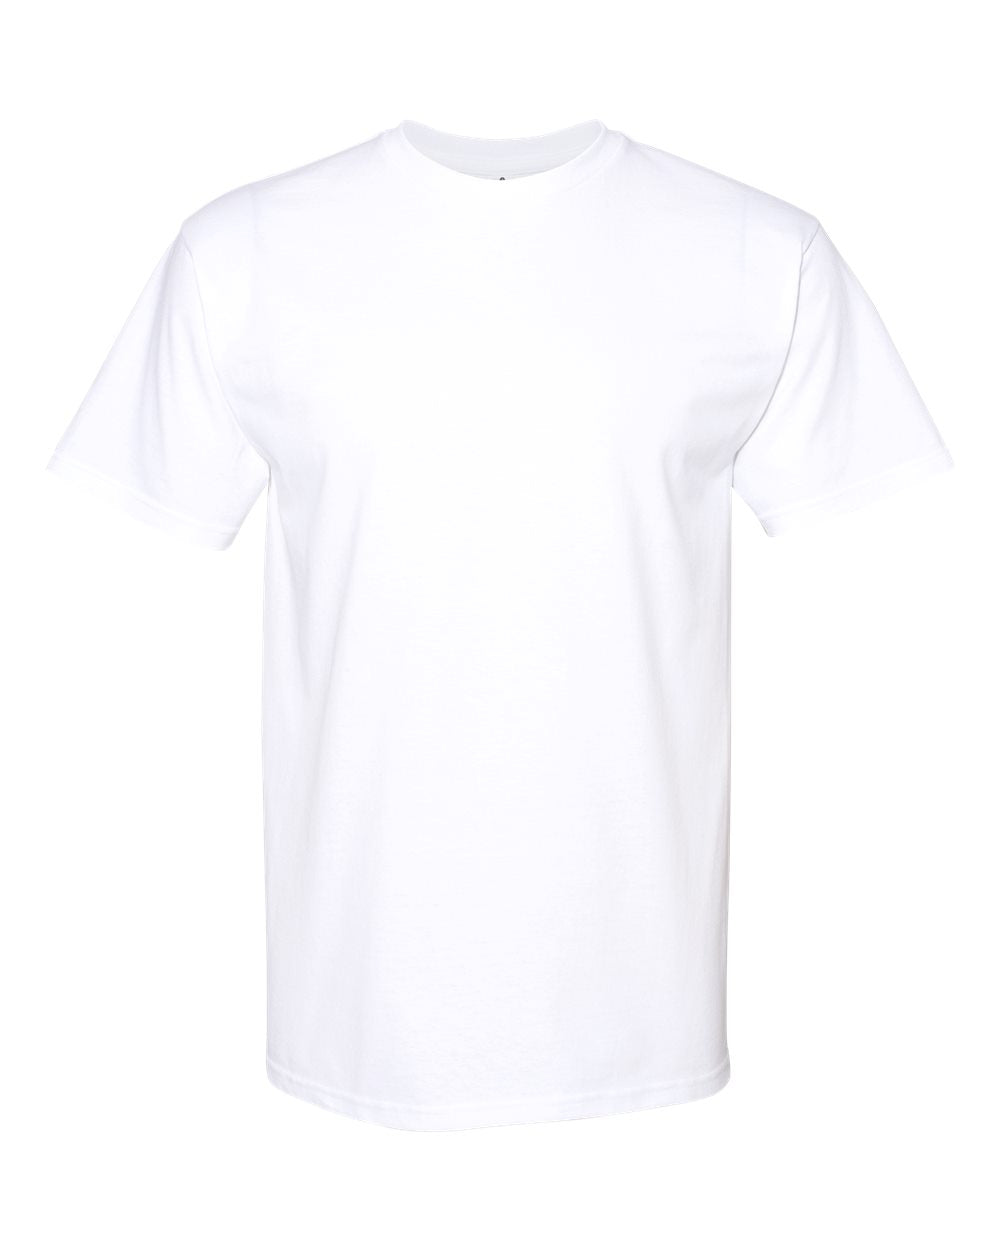 American Apparel Midweight Cotton Unisex Tee 1701 #color_White